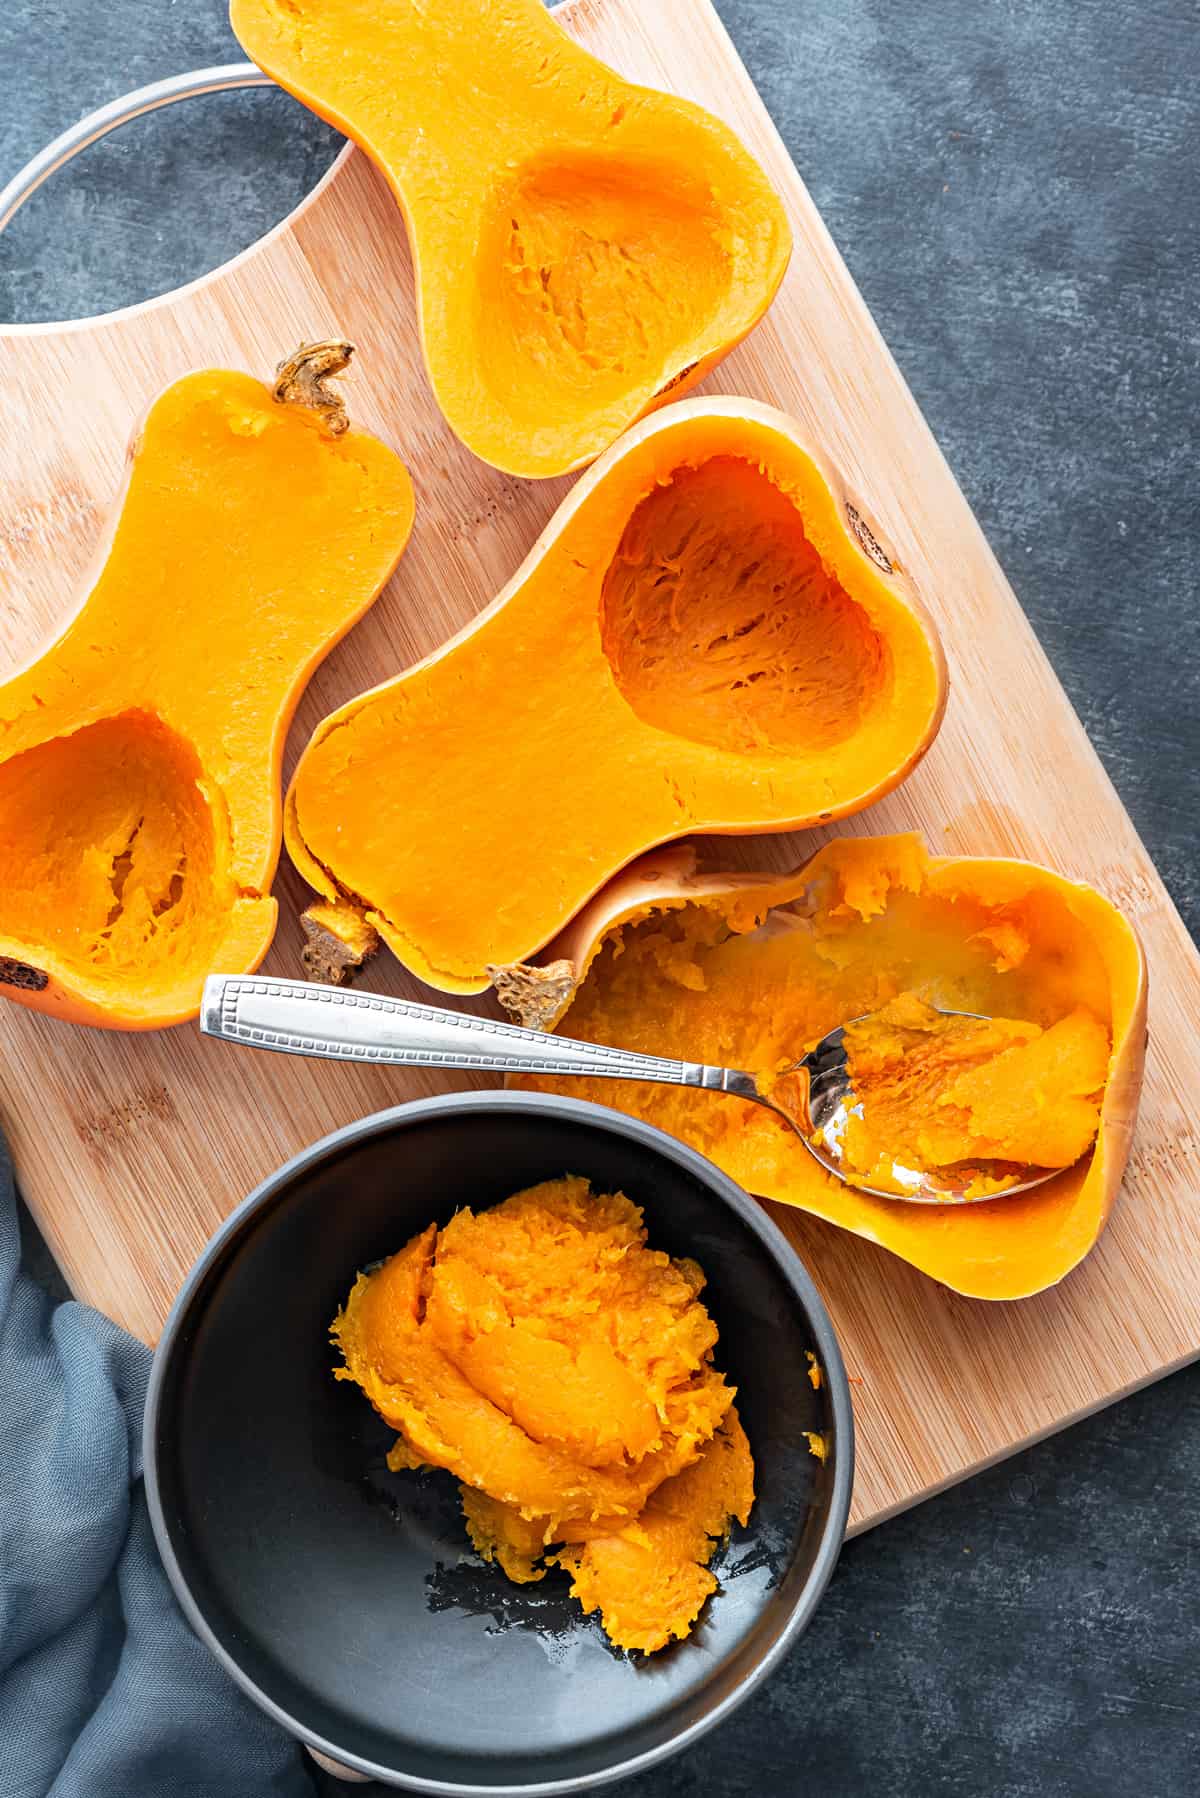 Four pressure cooked butternut squash halves. One halve scooped with a spoon into black bowl.